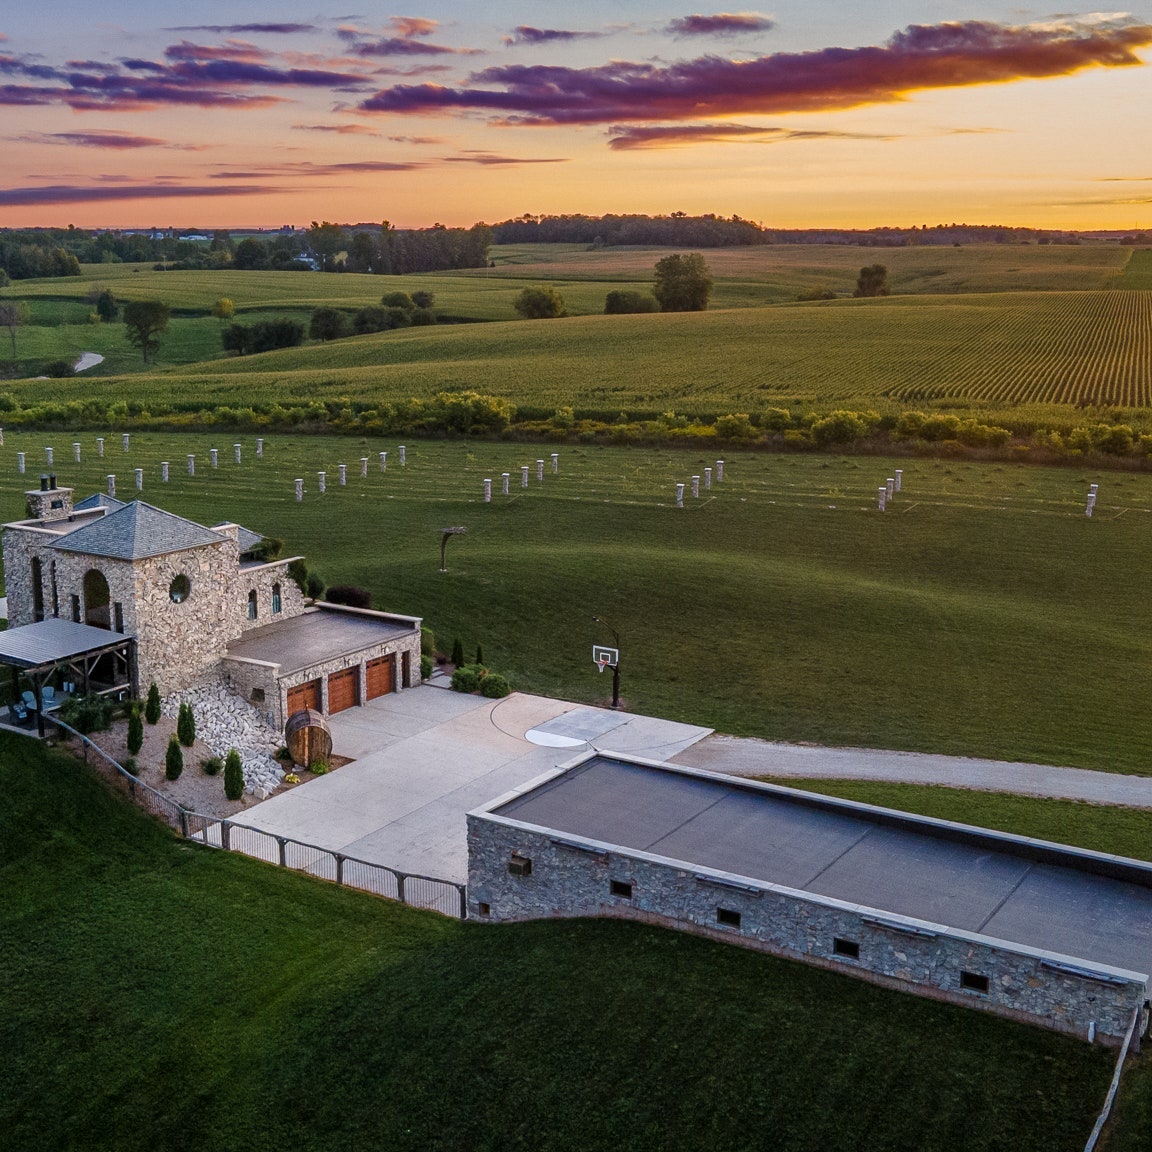 9 Vineyard Airbnbs for Your Next Wine-Country Trip